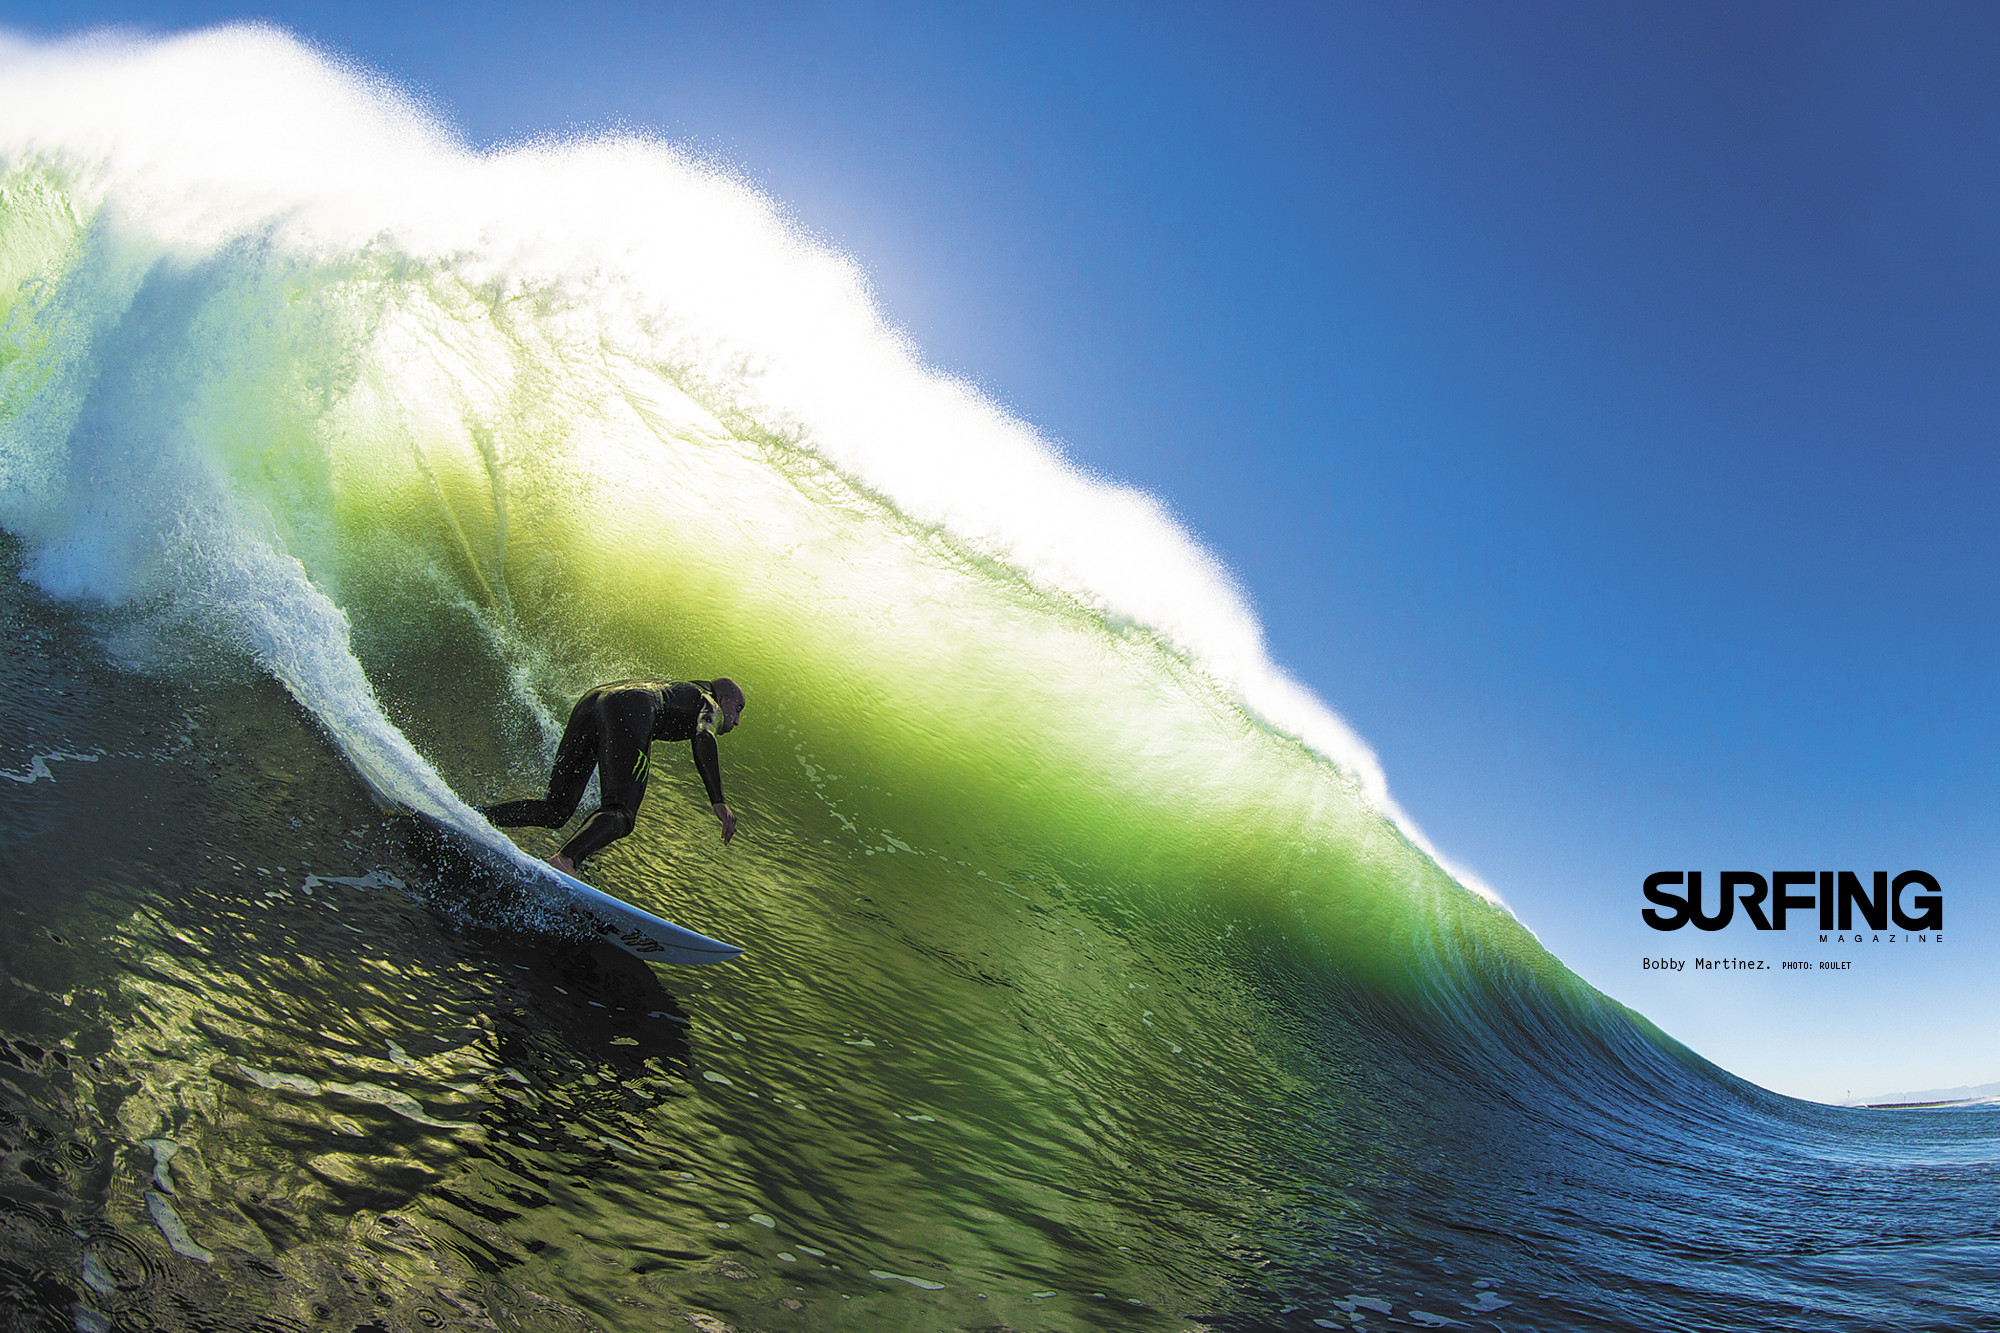 2000x1333 Click here for more SURFING wallpapers. bobbyroulet Download: Bobby  Martinez. Photo: Roulet tannergtaras